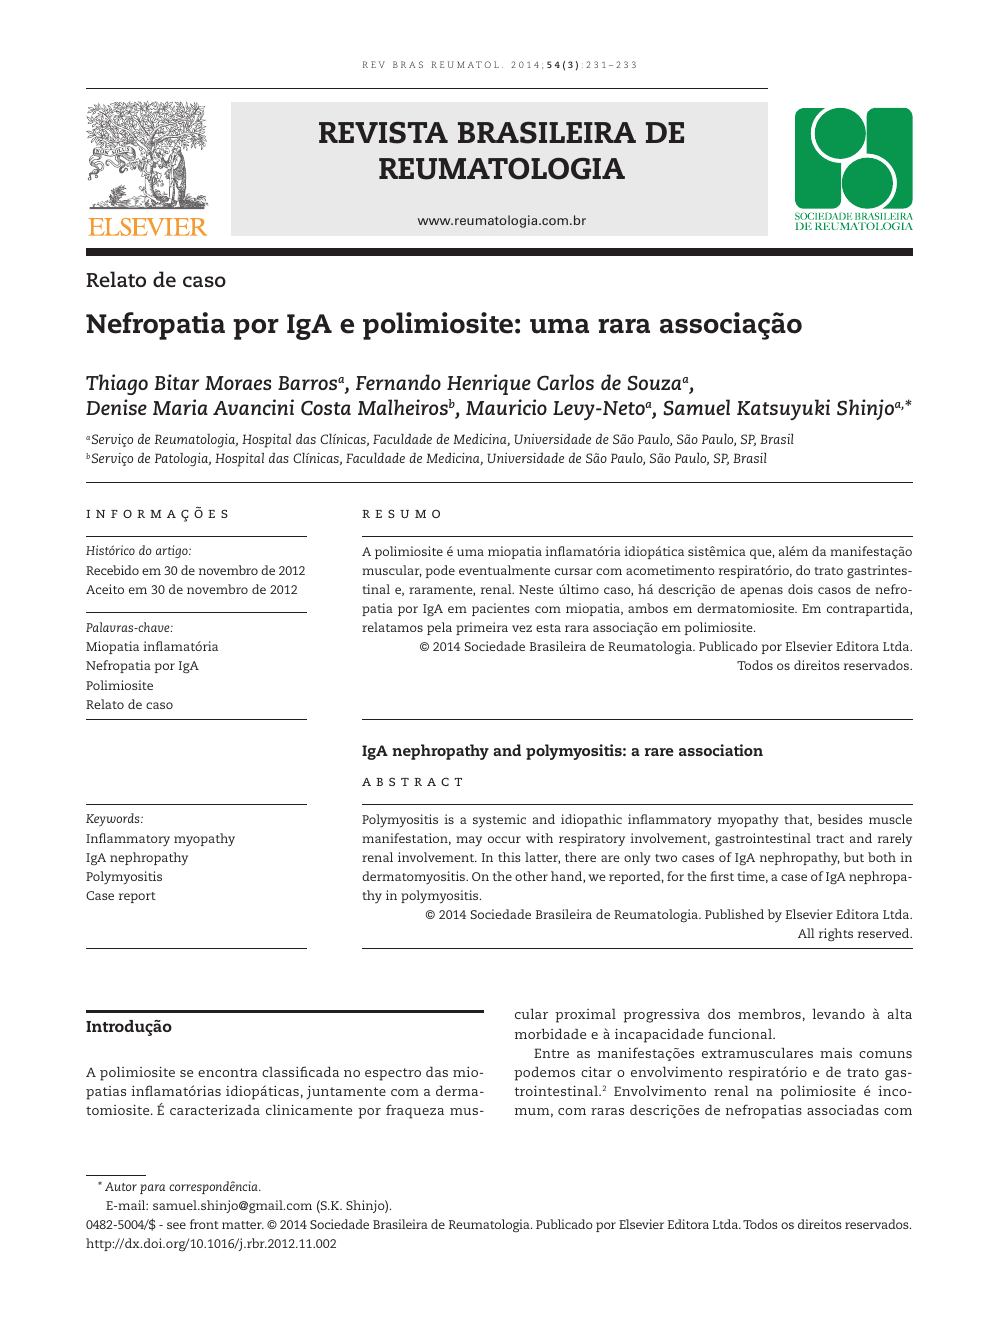 Nefropatia Por Iga E Polimiosite Uma Rara Associacao Topic Of Research Paper In Health Sciences Download Scholarly Article Pdf And Read For Free On Cyberleninka Open Science Hub